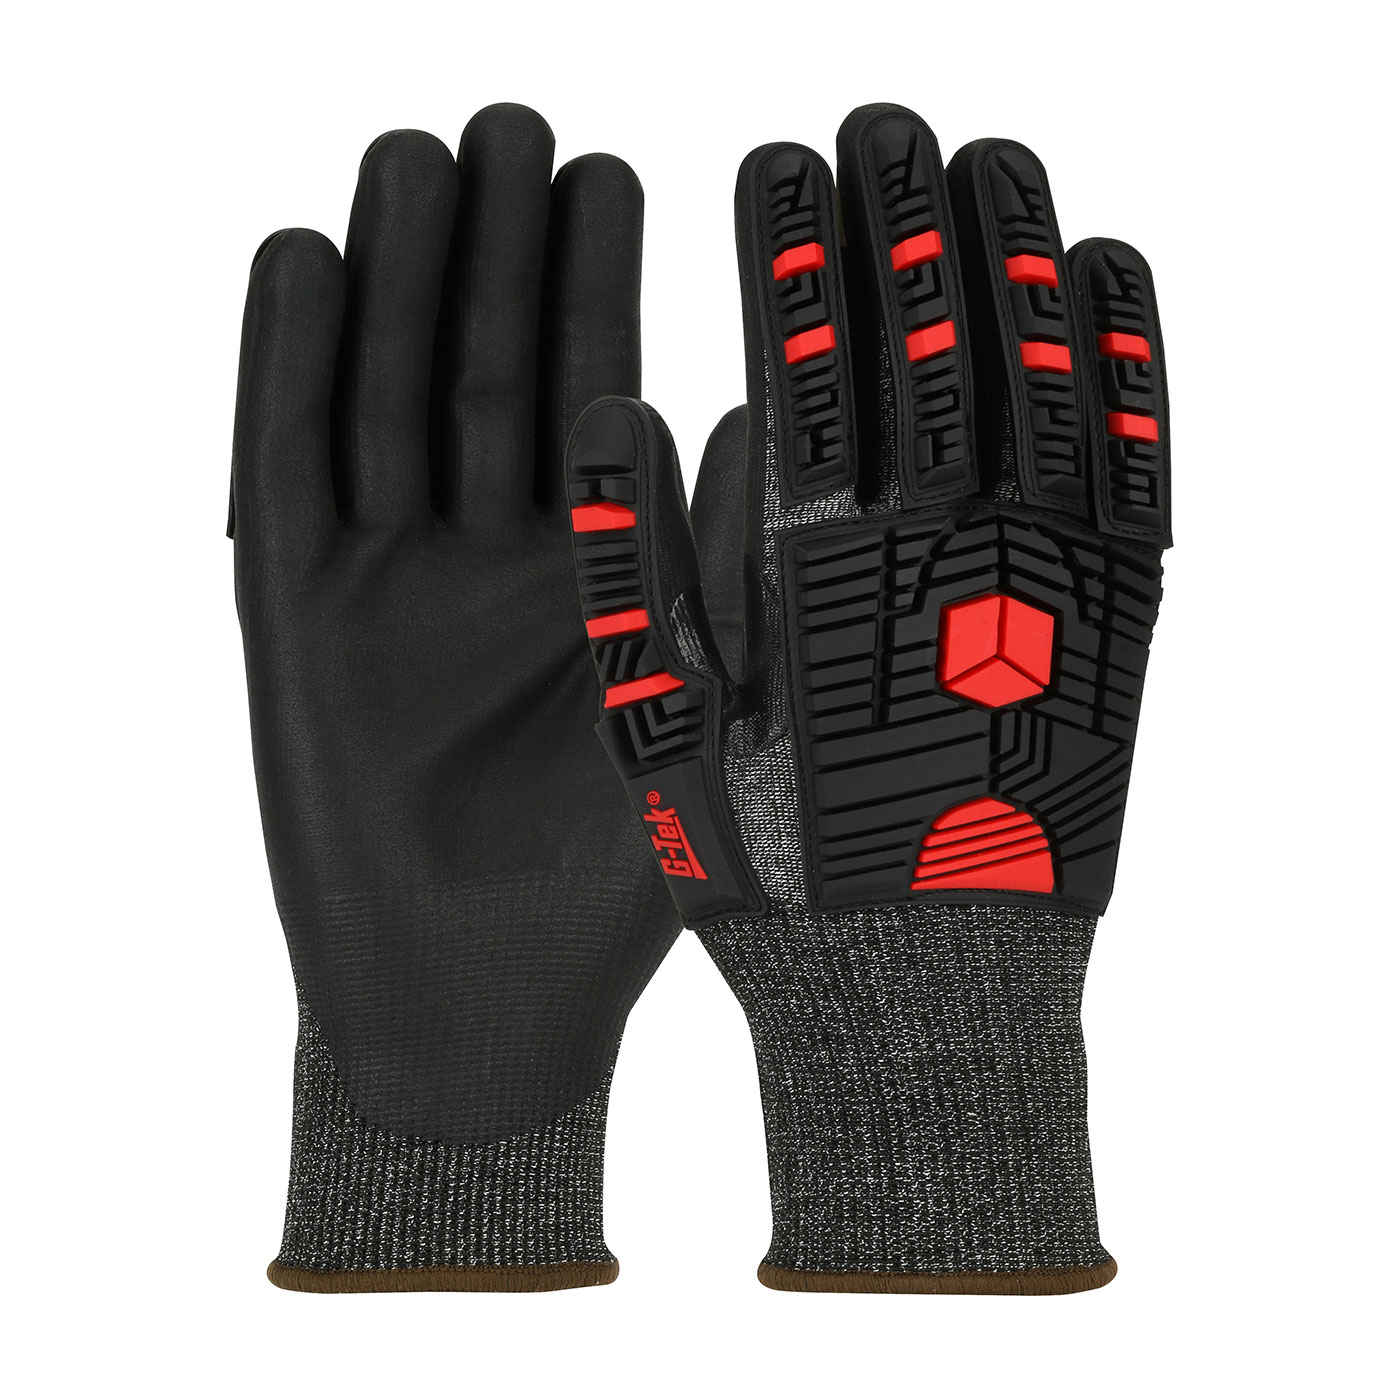 16-MP935 PIP® Seamless Knit G-Tek®  PolyKor® X7™ Blended Glove with Impact Protection and NeoFoam® Microsurface Coated Palm & Fingers